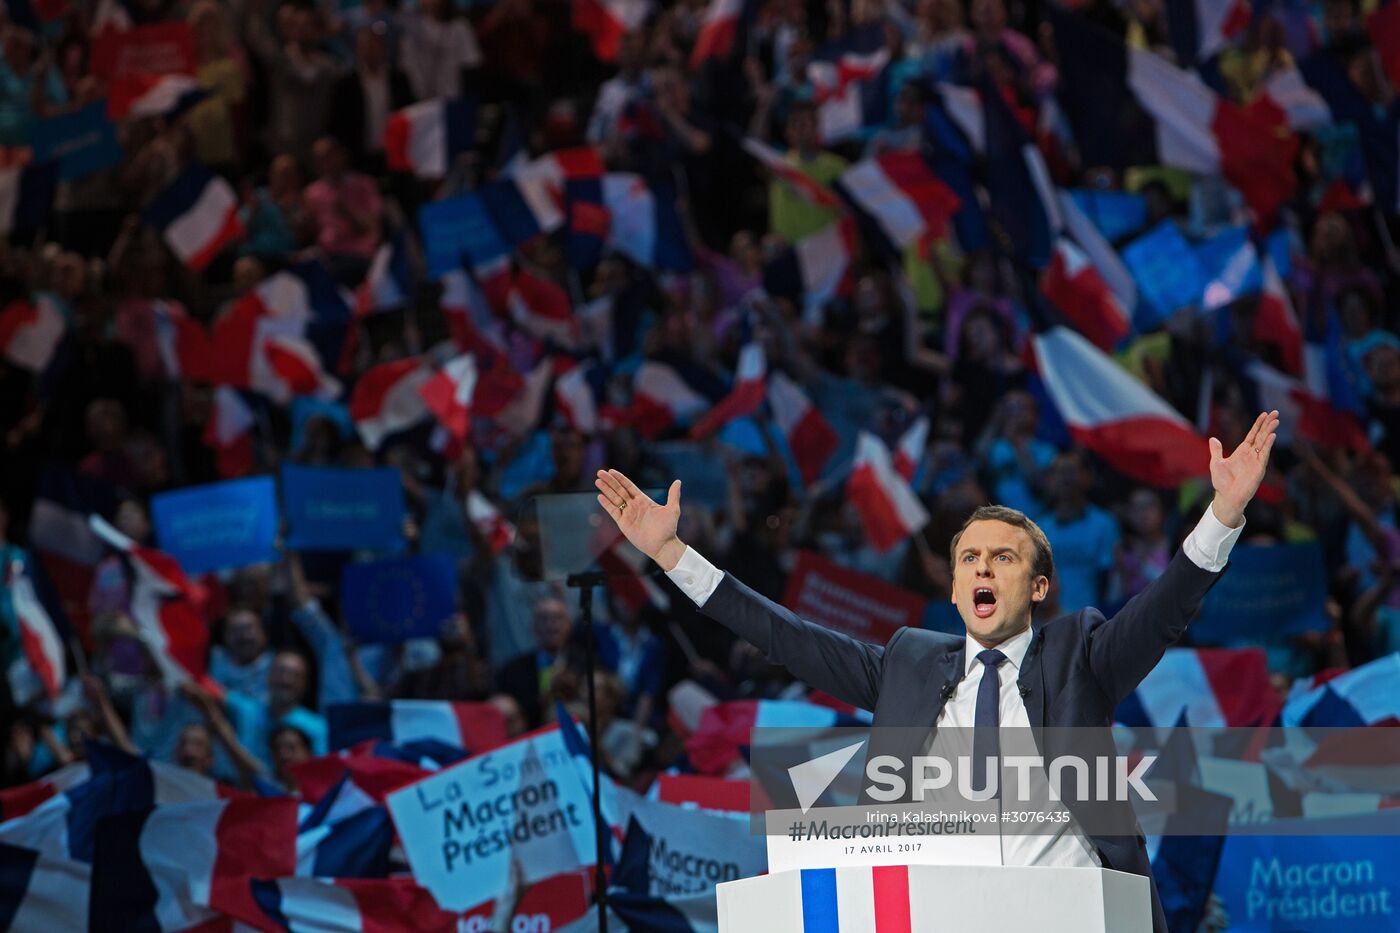 Presidential candidate Emmanuel Macron meets with supporters in Paris